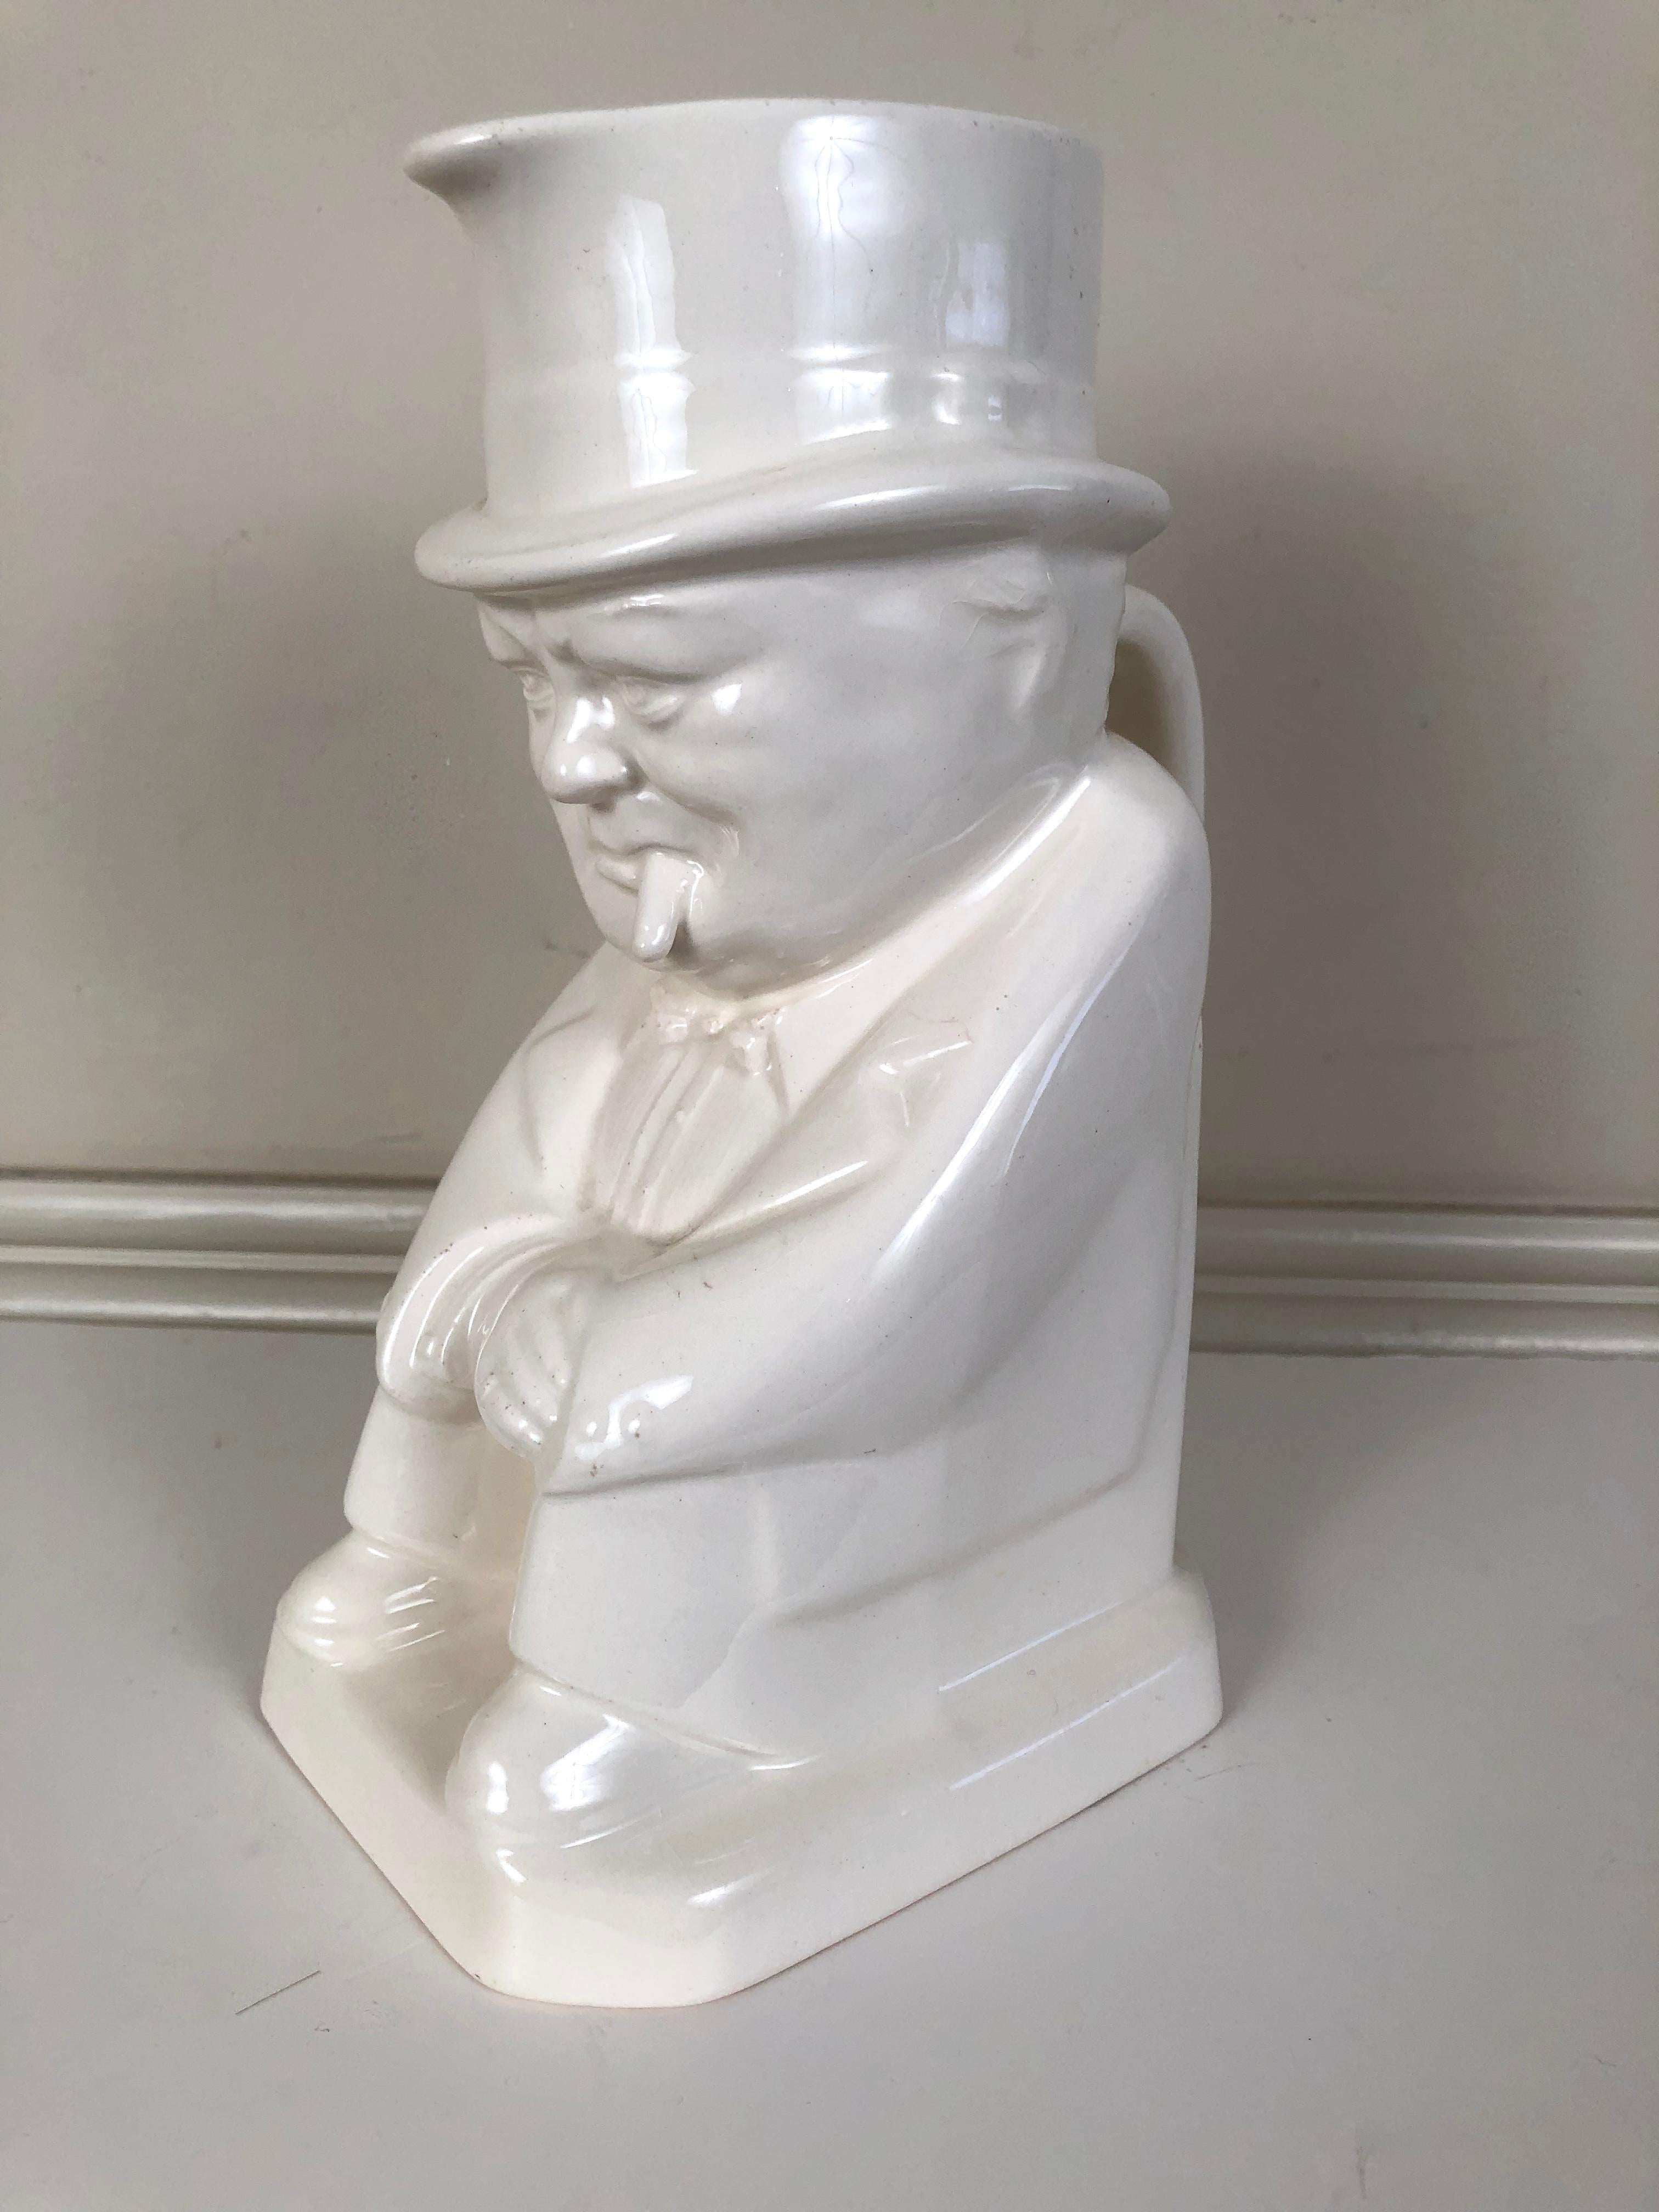 A blanc de chine white ceramic pottery pitcher (or Toby jug) of Sir Winston Churchill designed by Eric Olsen for Spode, the spout issuing from Churchill's signature top hat, his face expressively modeled, replete with his omnipresent cigar.